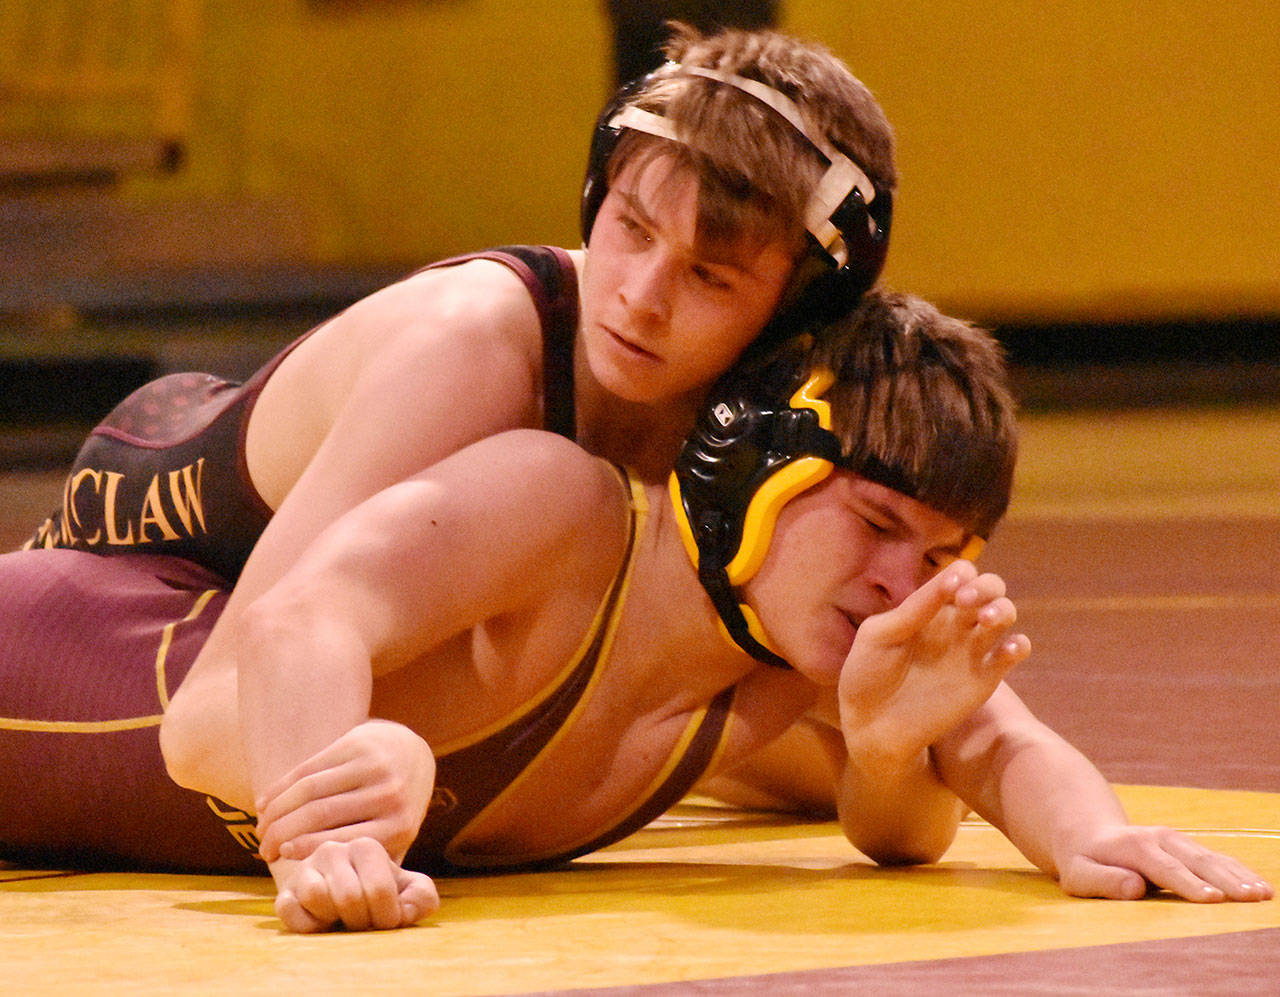 Among the Enumclaw High wrestlers defeating their Thomas Jefferson opponents on Dec. 18 was Cole Bowen, who picked up a major decision at 132 pounds. Photo by Kevin Hanson